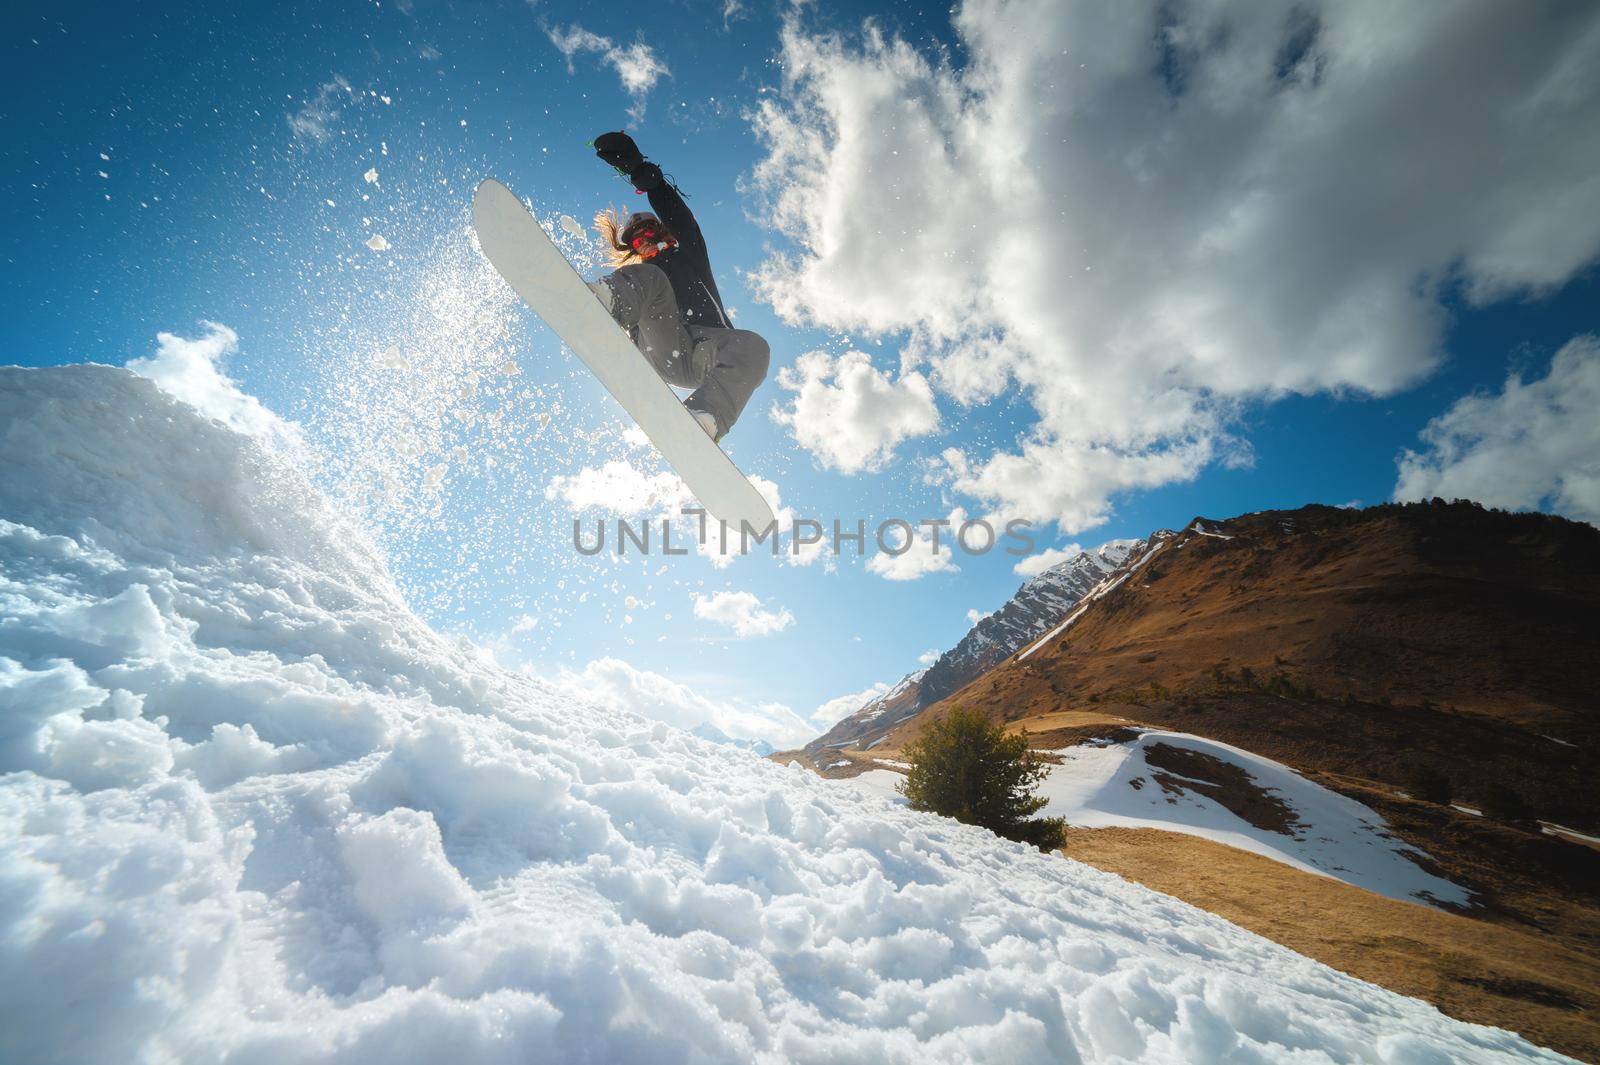 Extreme winter sports. Young professional woman snowboarder rides a halfpipe. Jumps from a halfpipe trampoline in the sun, performs tricks and turns with grabs in a sunny winter by yanik88